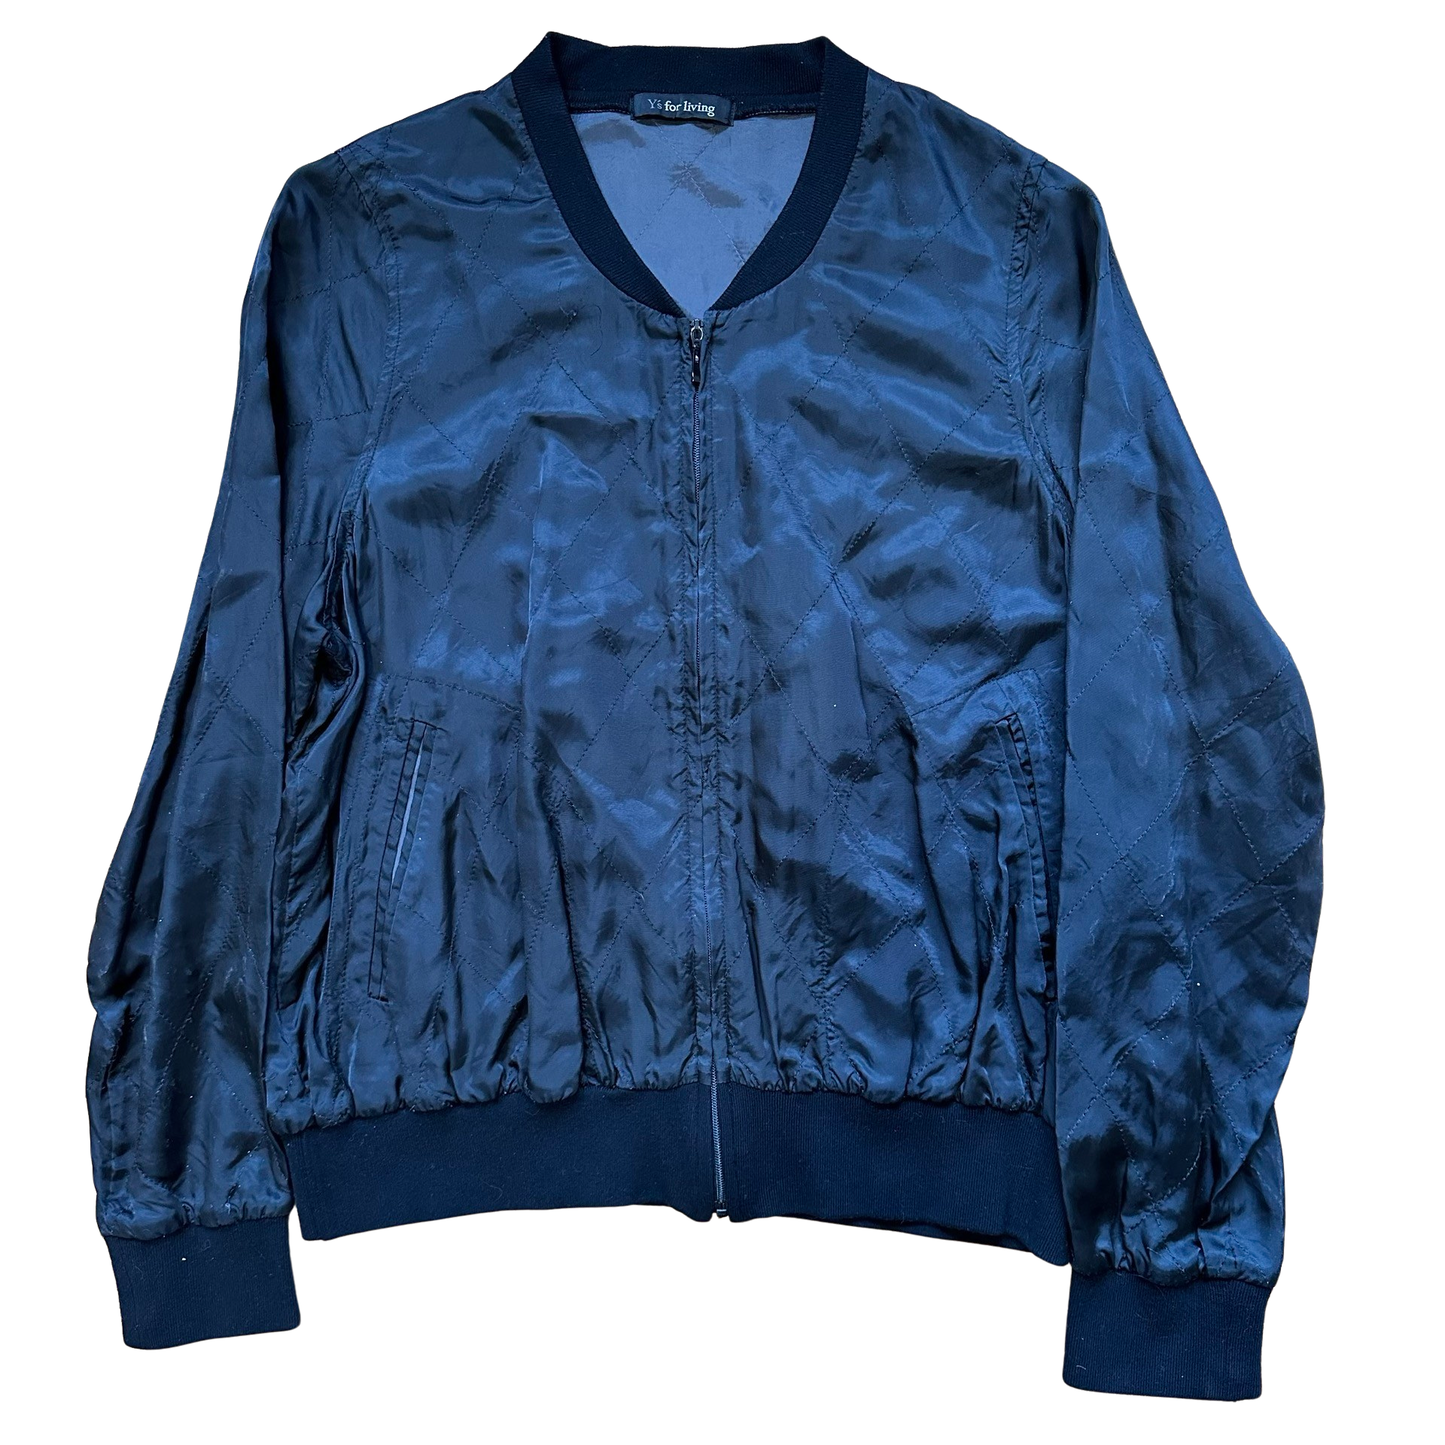 Y’s for Living by Yohji Yamamoto Quilted Rayon Bomber Sz Small